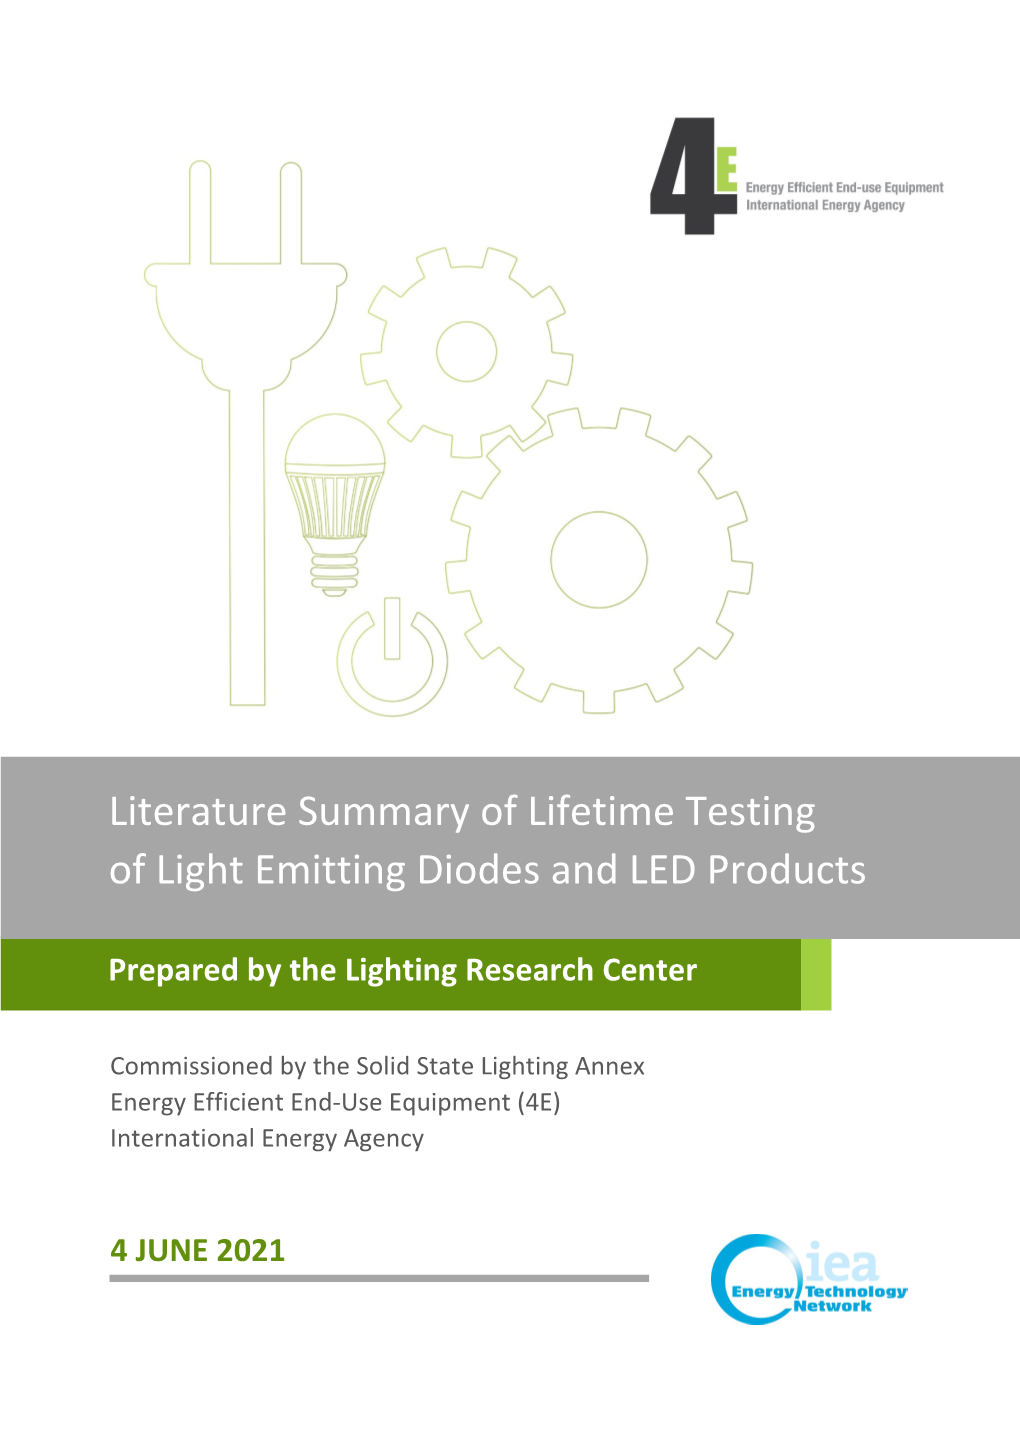 Literature Summary of Lifetime Testing of Light Emitting Diodes and LED Products